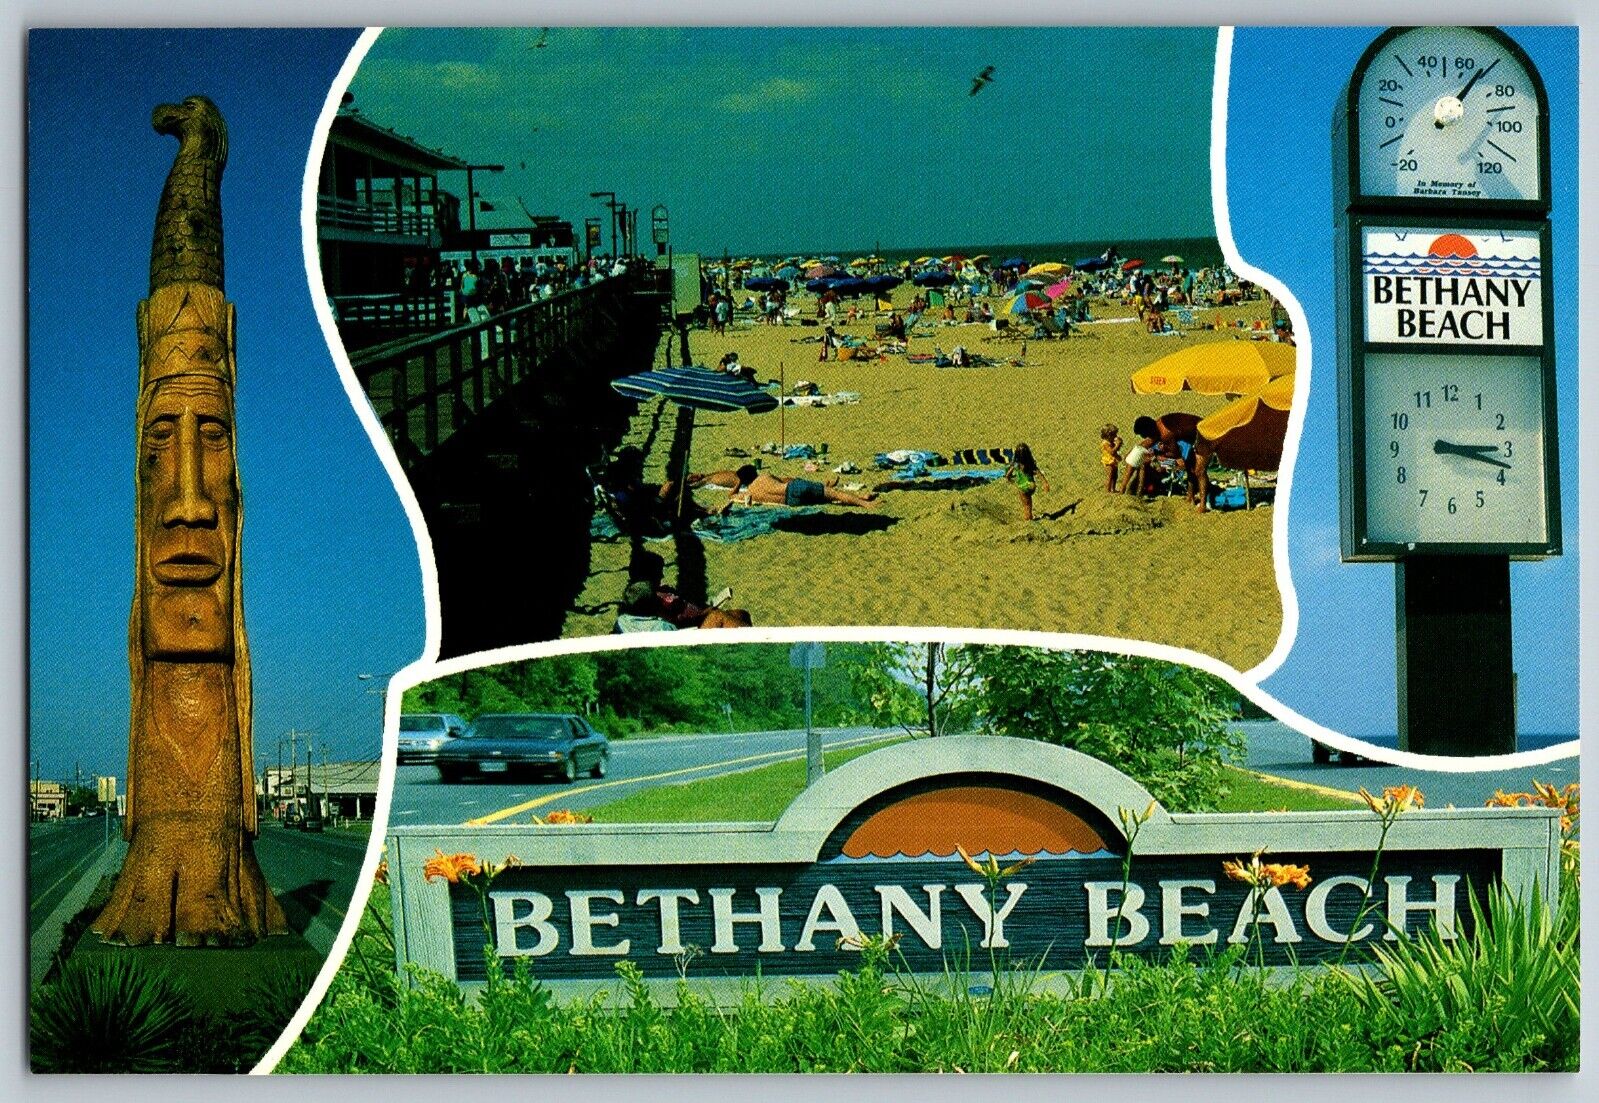 Delaware DE - View of Beautiful Bethany Beach - Vintage Postcard 4x6 - Unposted